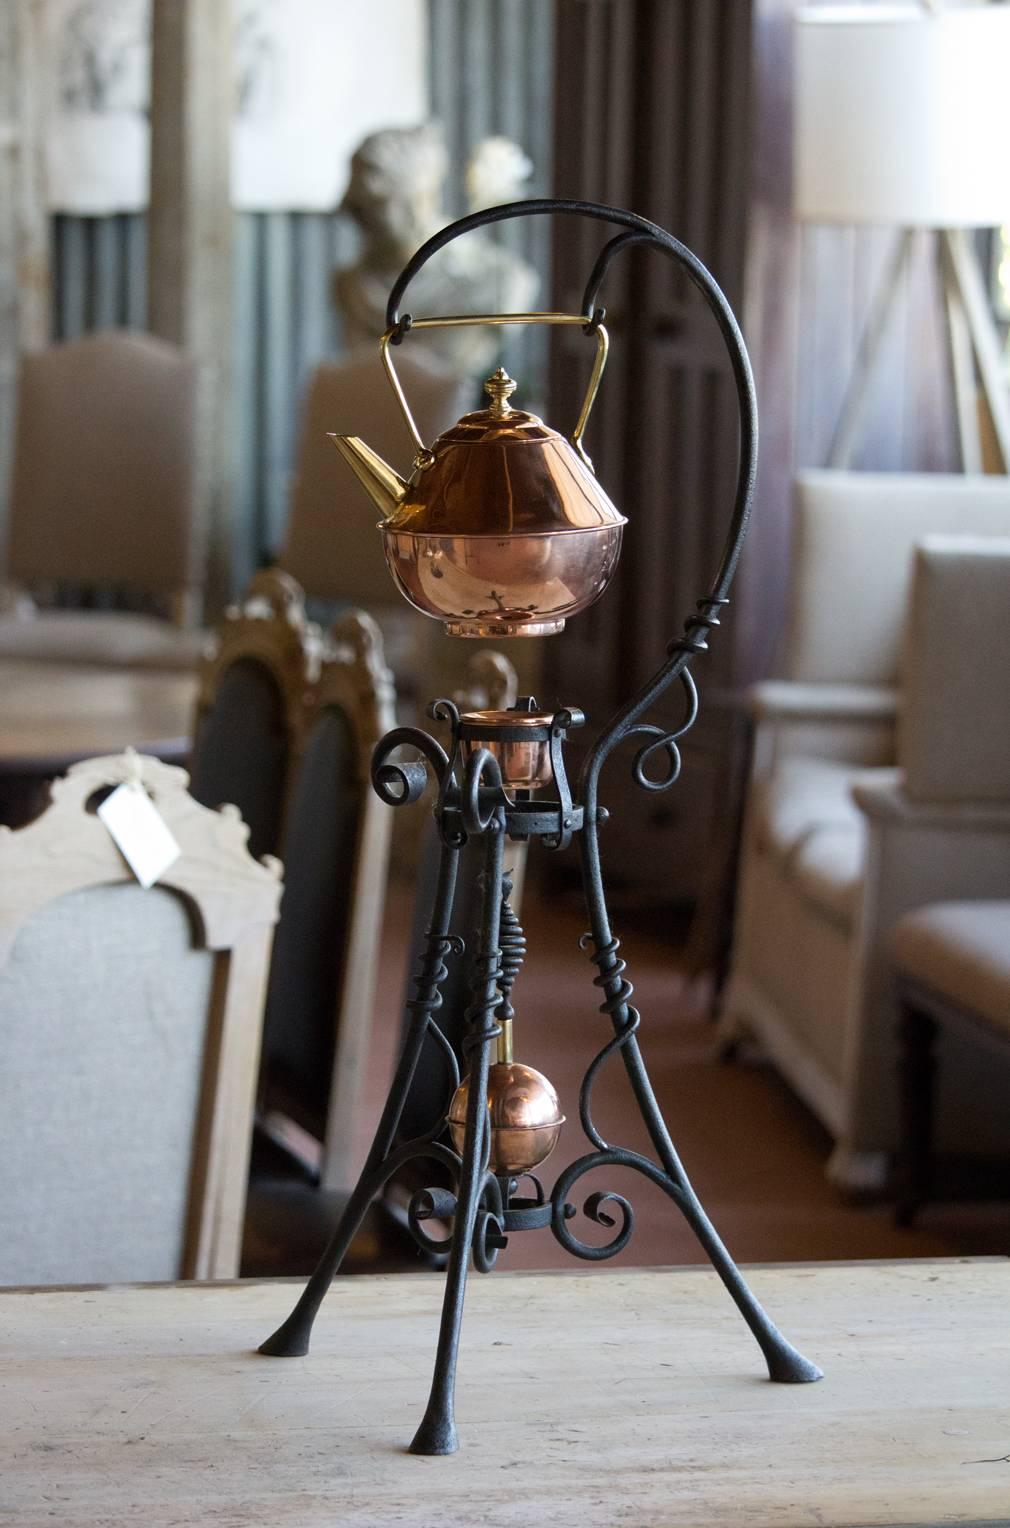 A rare Dr. Christopher Dresser designed copper spirit kettle on wrought iron stand. It was manufactured by Benham & Froud of London and bears their famous 